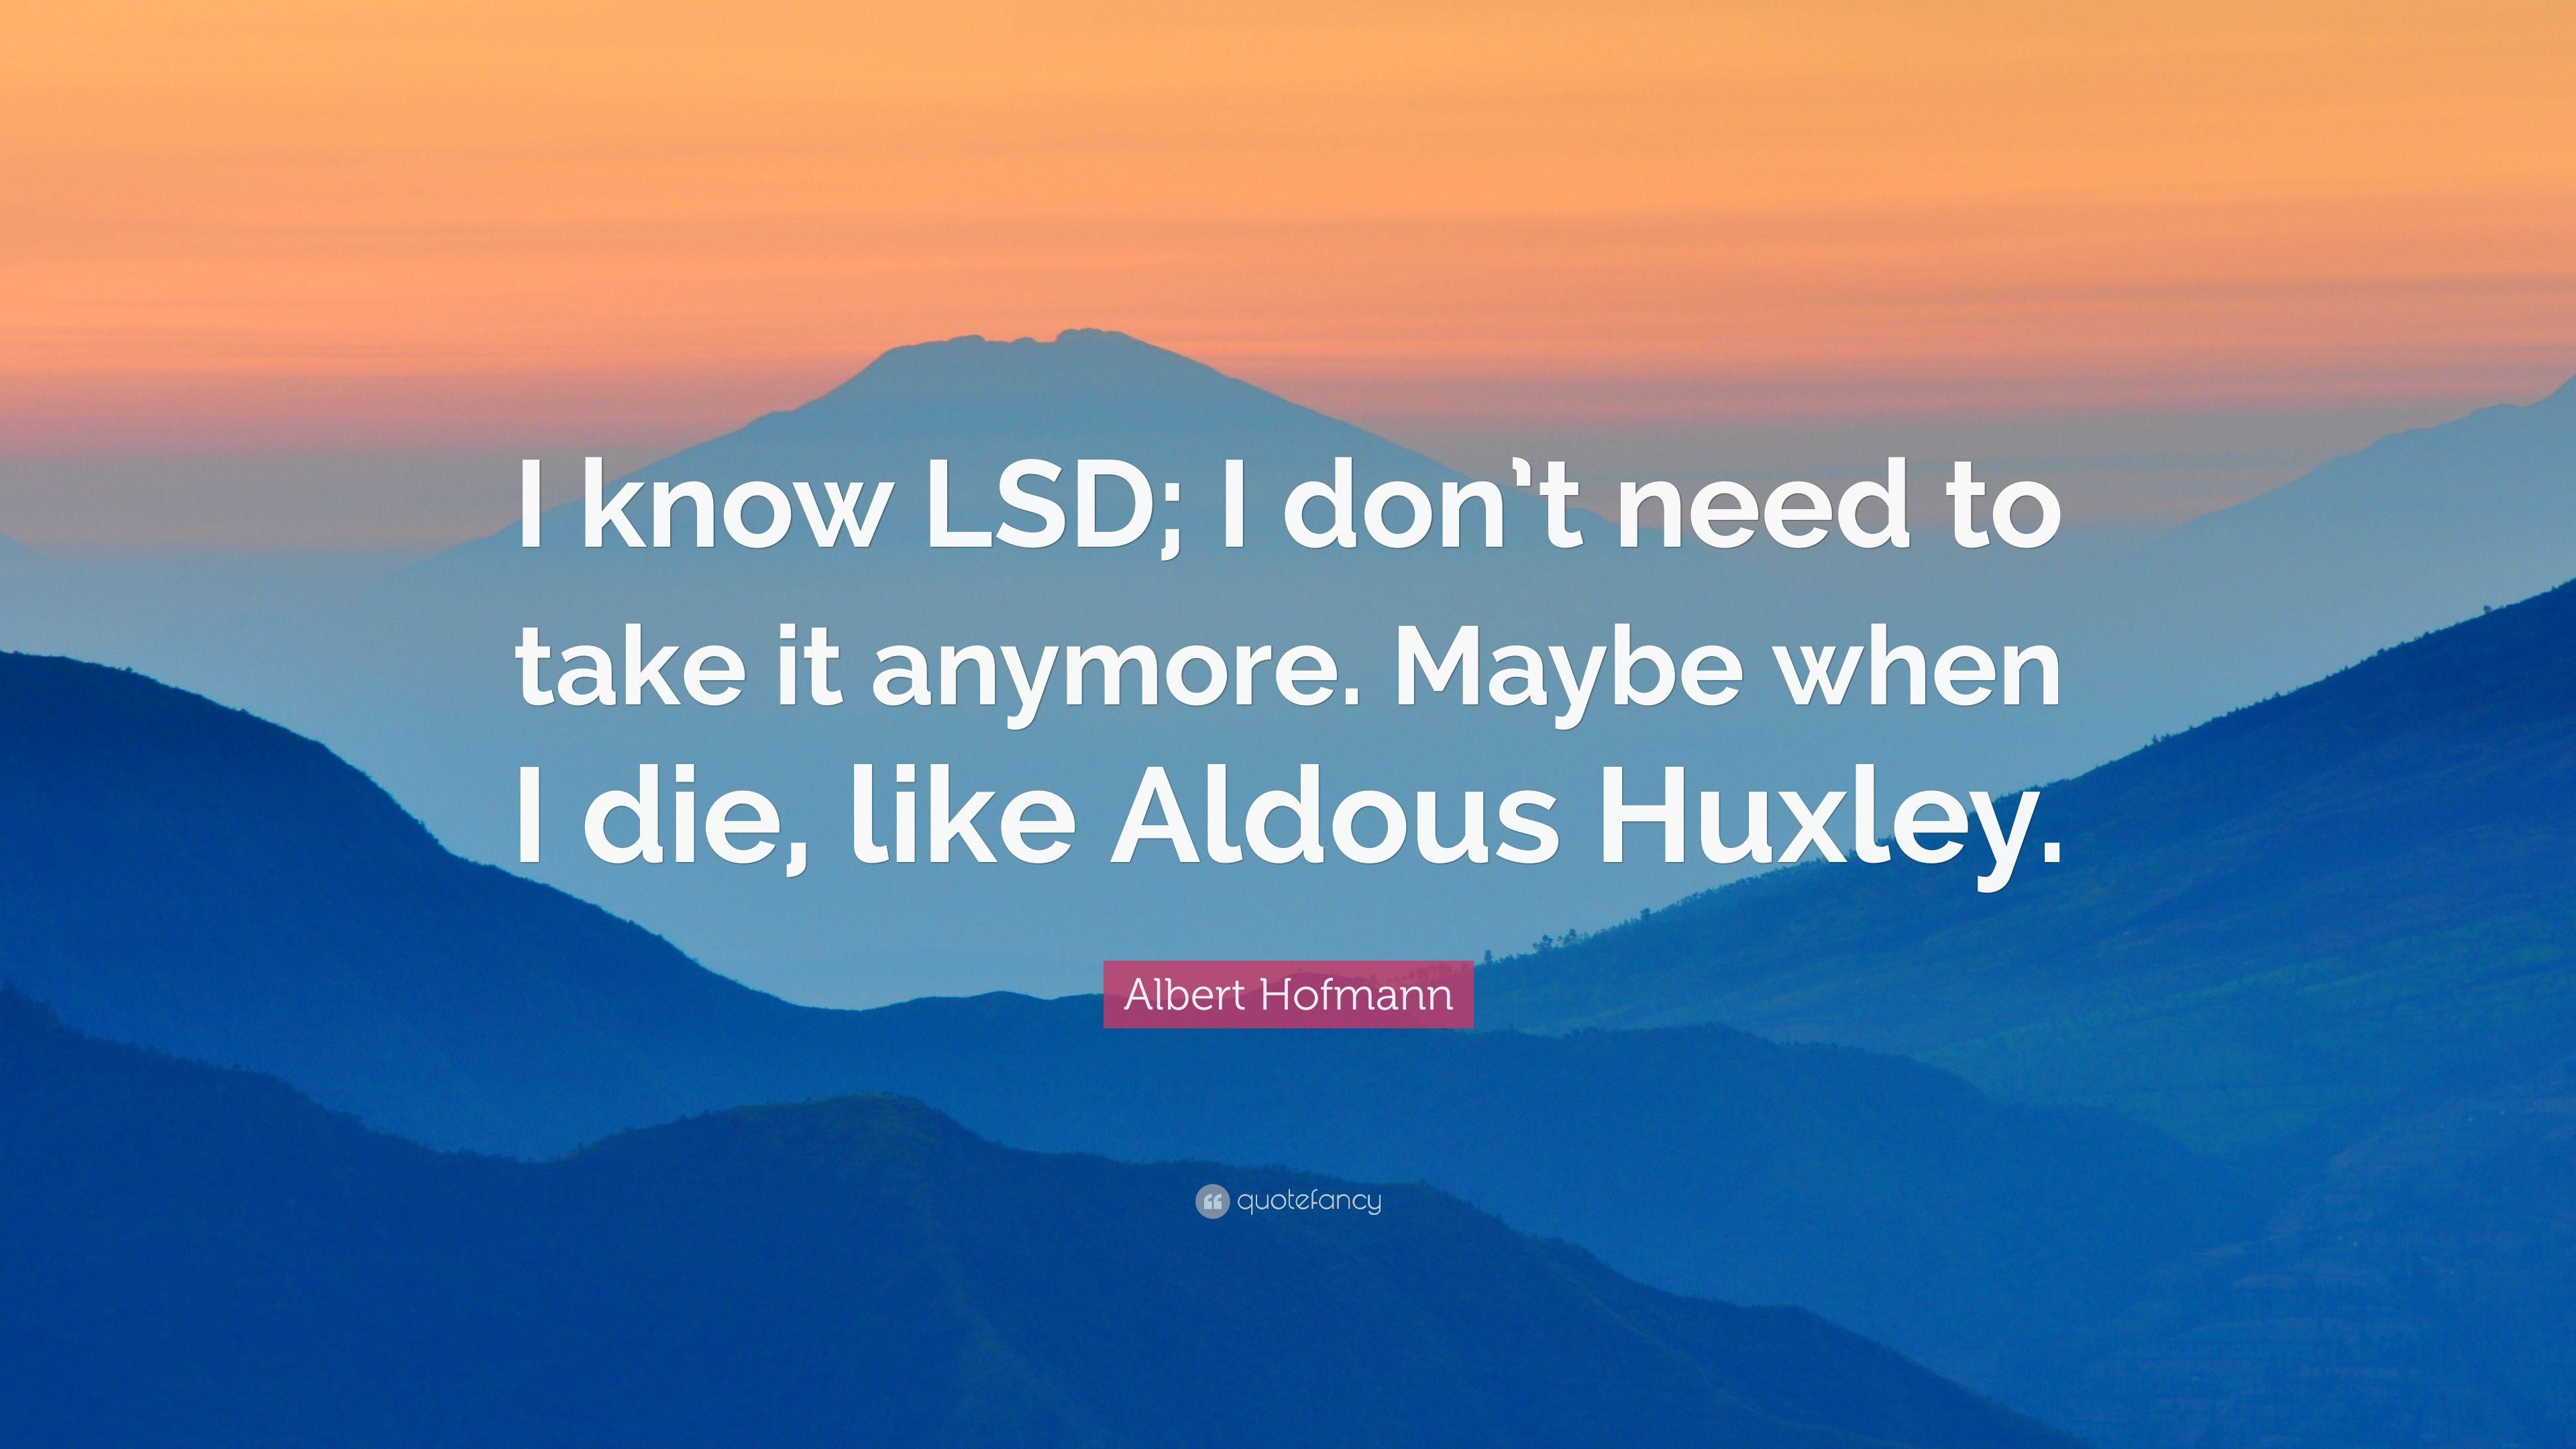 Albert Hofmann Quote: “I know LSD; I don't need to take it anymore